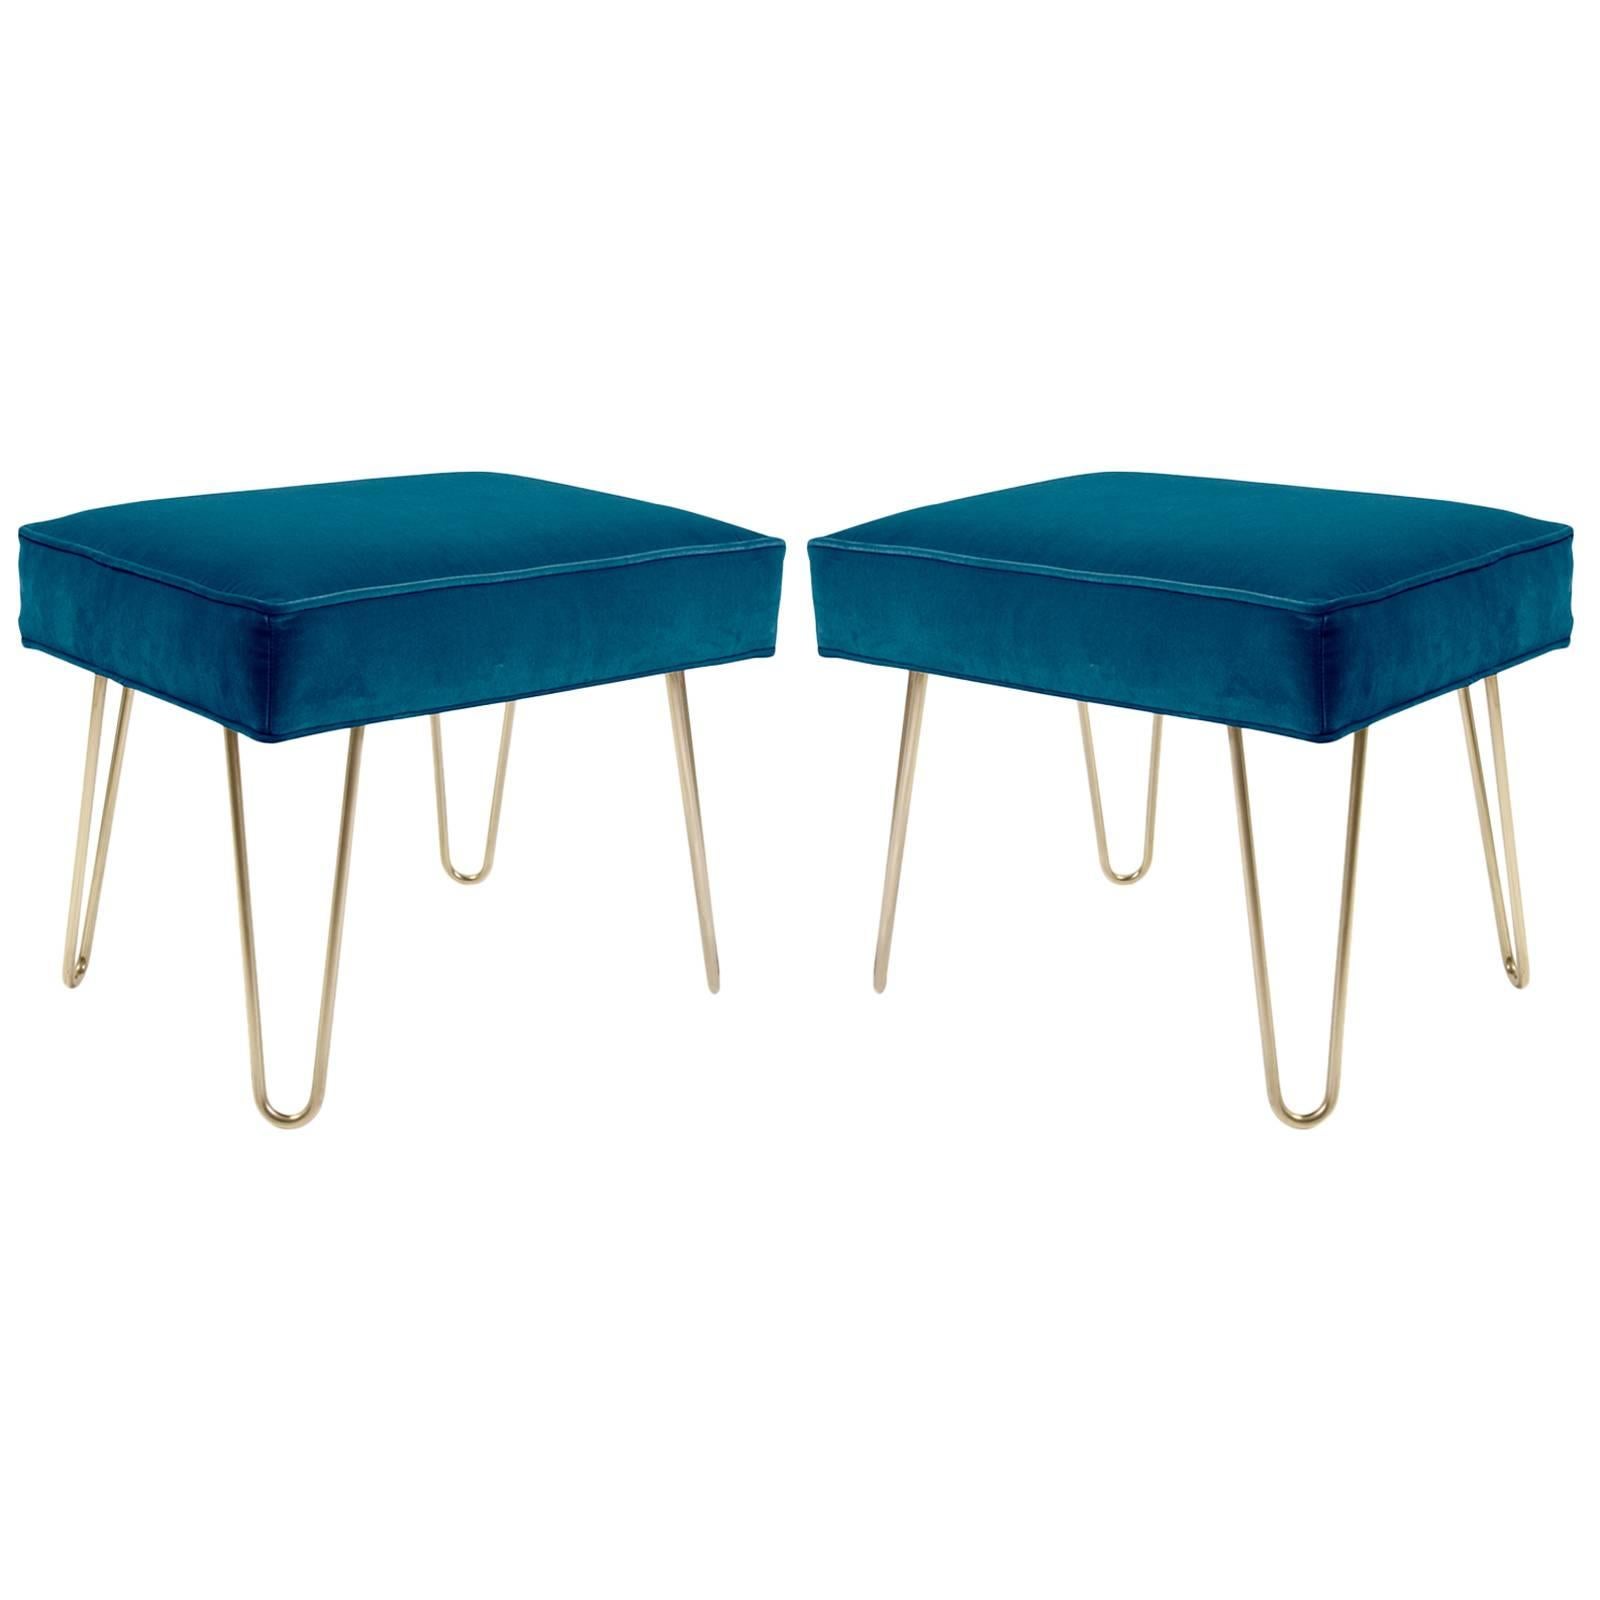 Petite Brass Hairpin Ottomans in Indigo Velvet by Montage For Sale